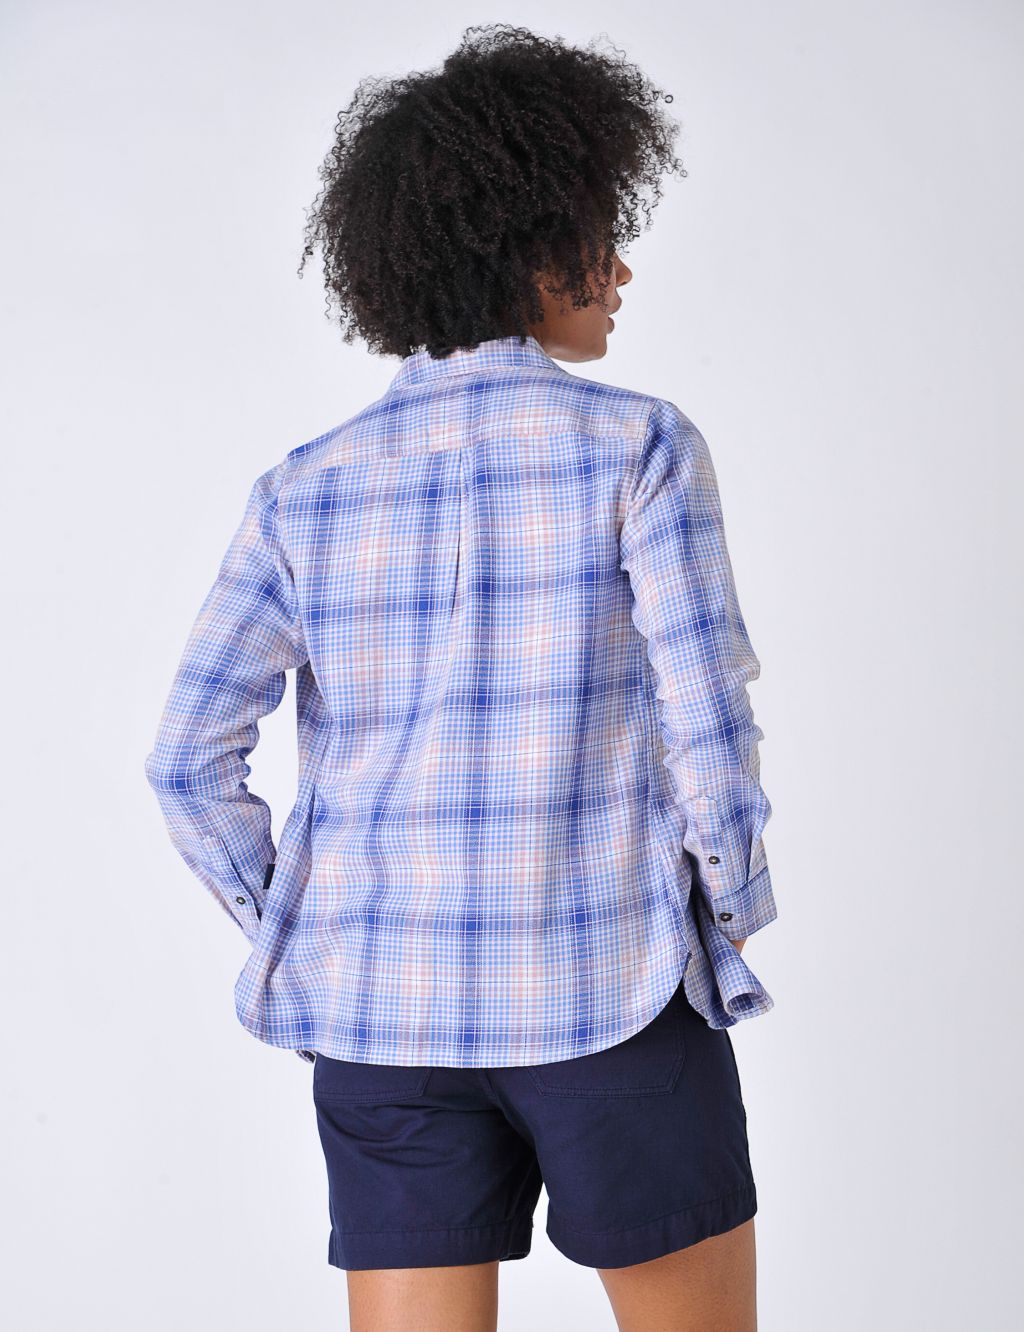 Brushed Pure Cotton Checked Shirt image 2